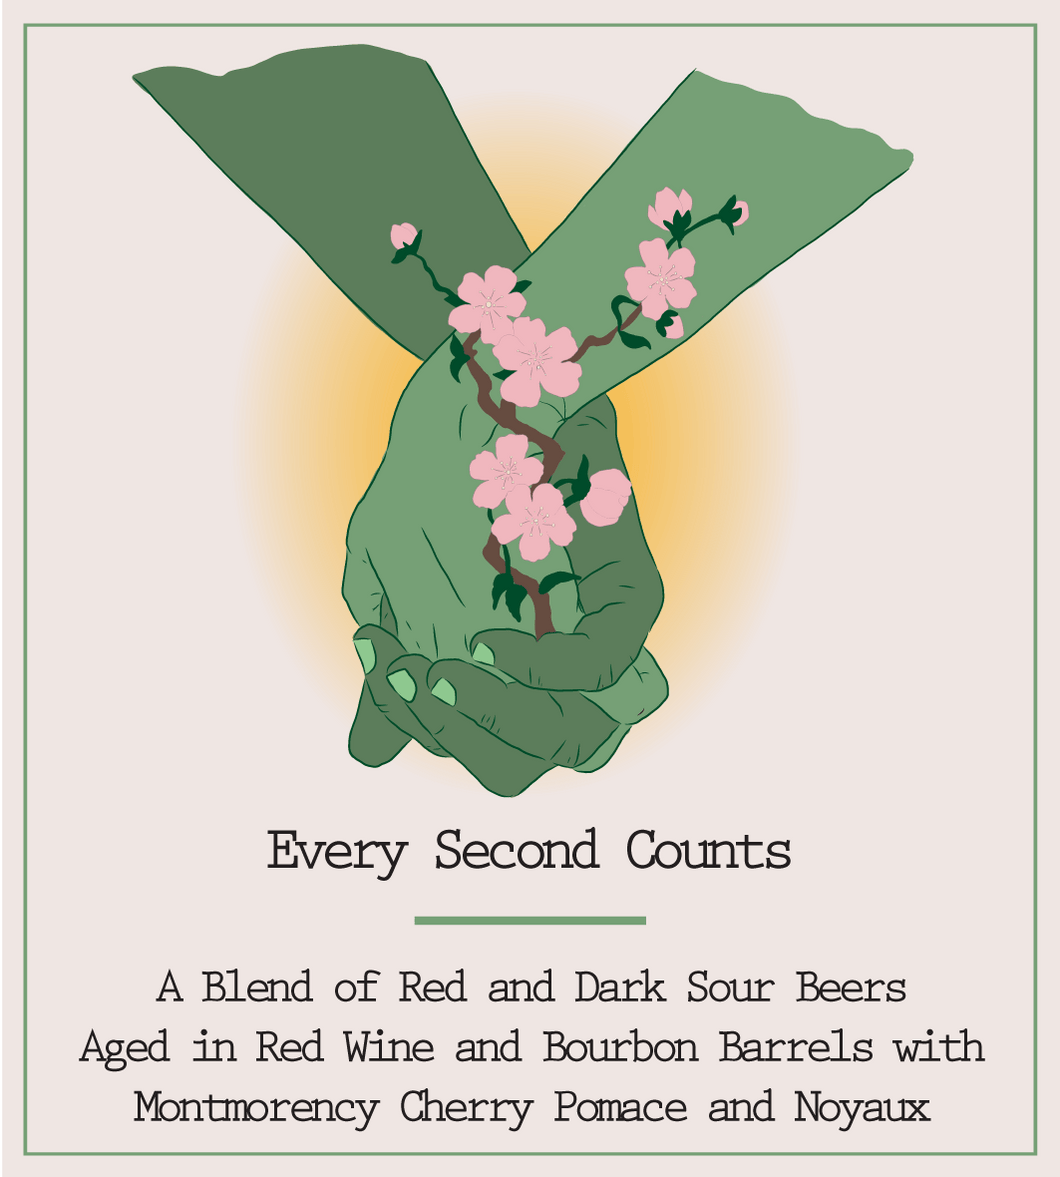 Every Second Counts 2021 Free Club Bottle